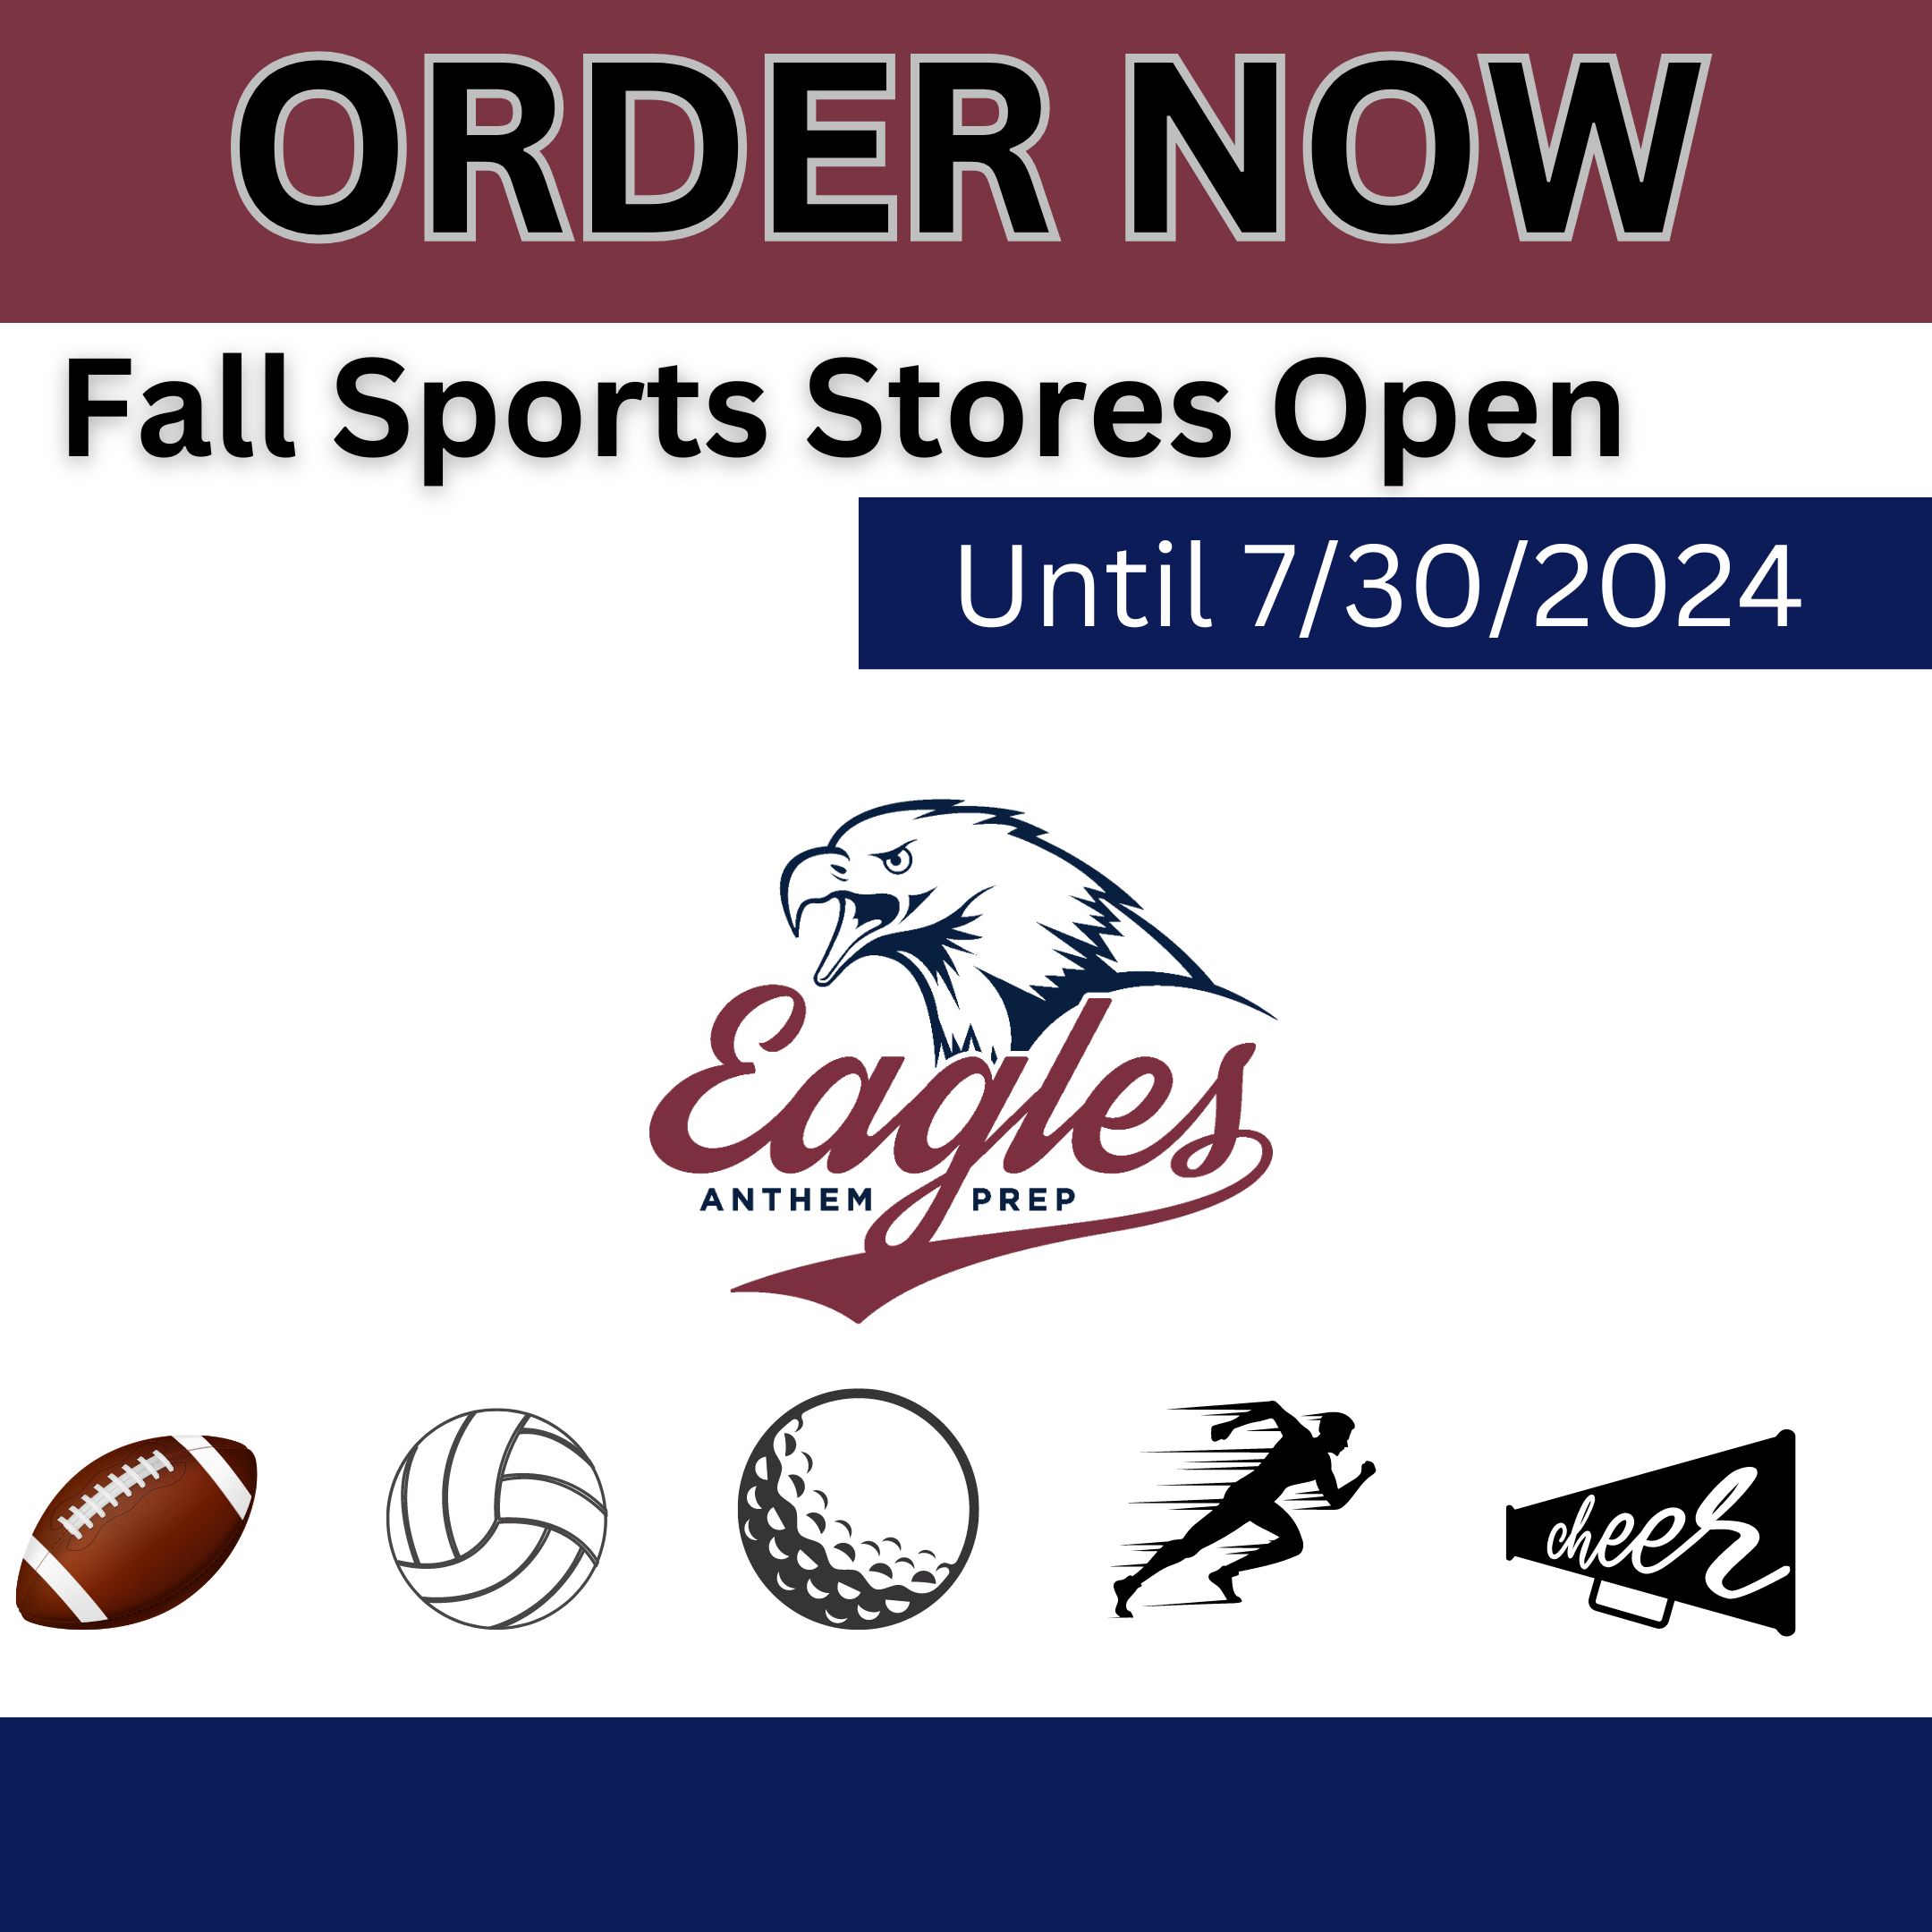 1721737592_OrderNow-falllswag.jpg - Image for Fall Sports Swag Store Open Until 7/30/2024